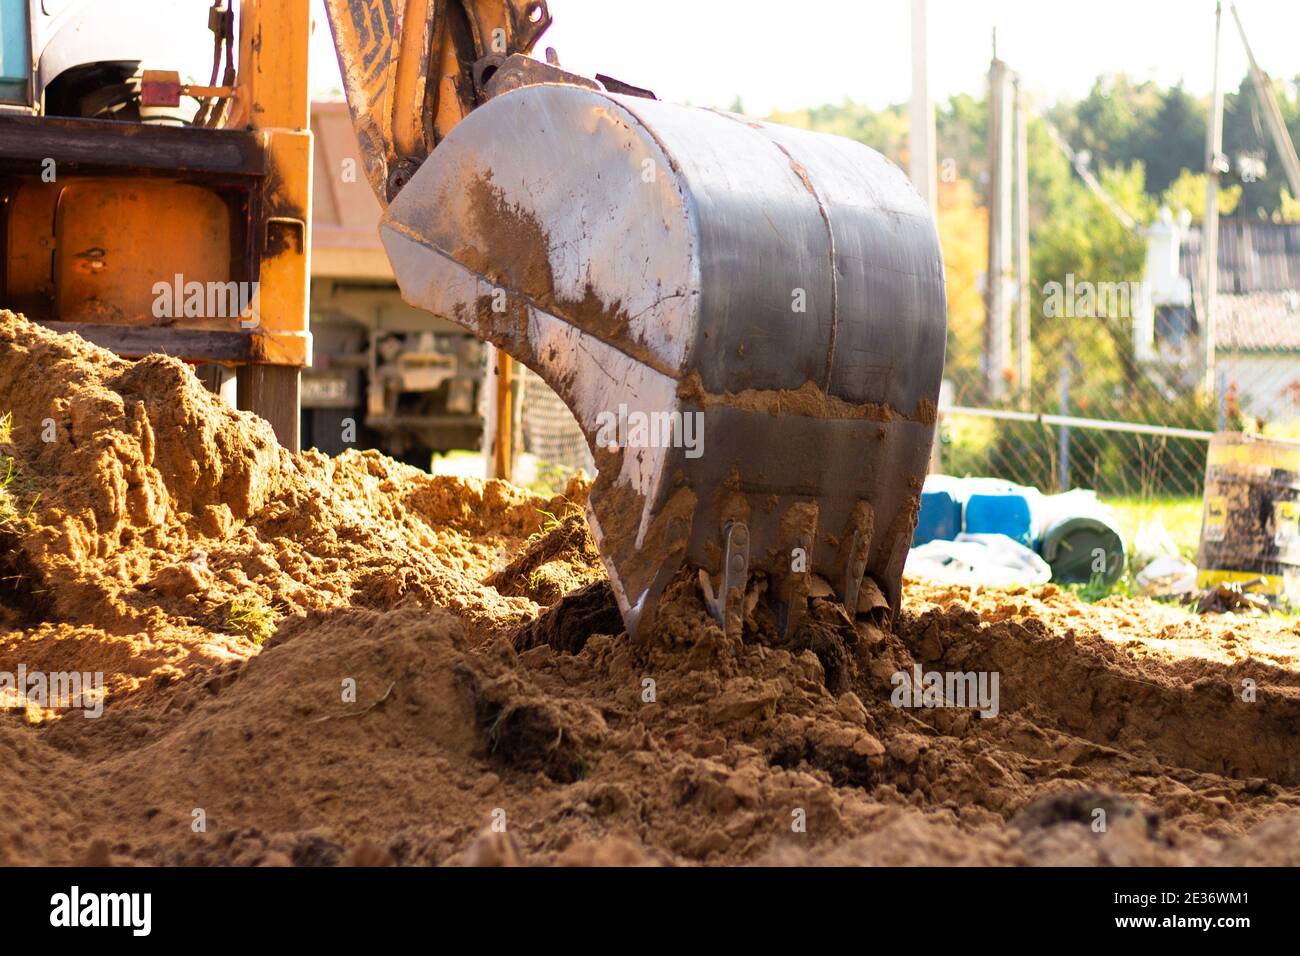 An excavator metal bucket digs sand or clay on a construction site, digging a trench. Stock Photo